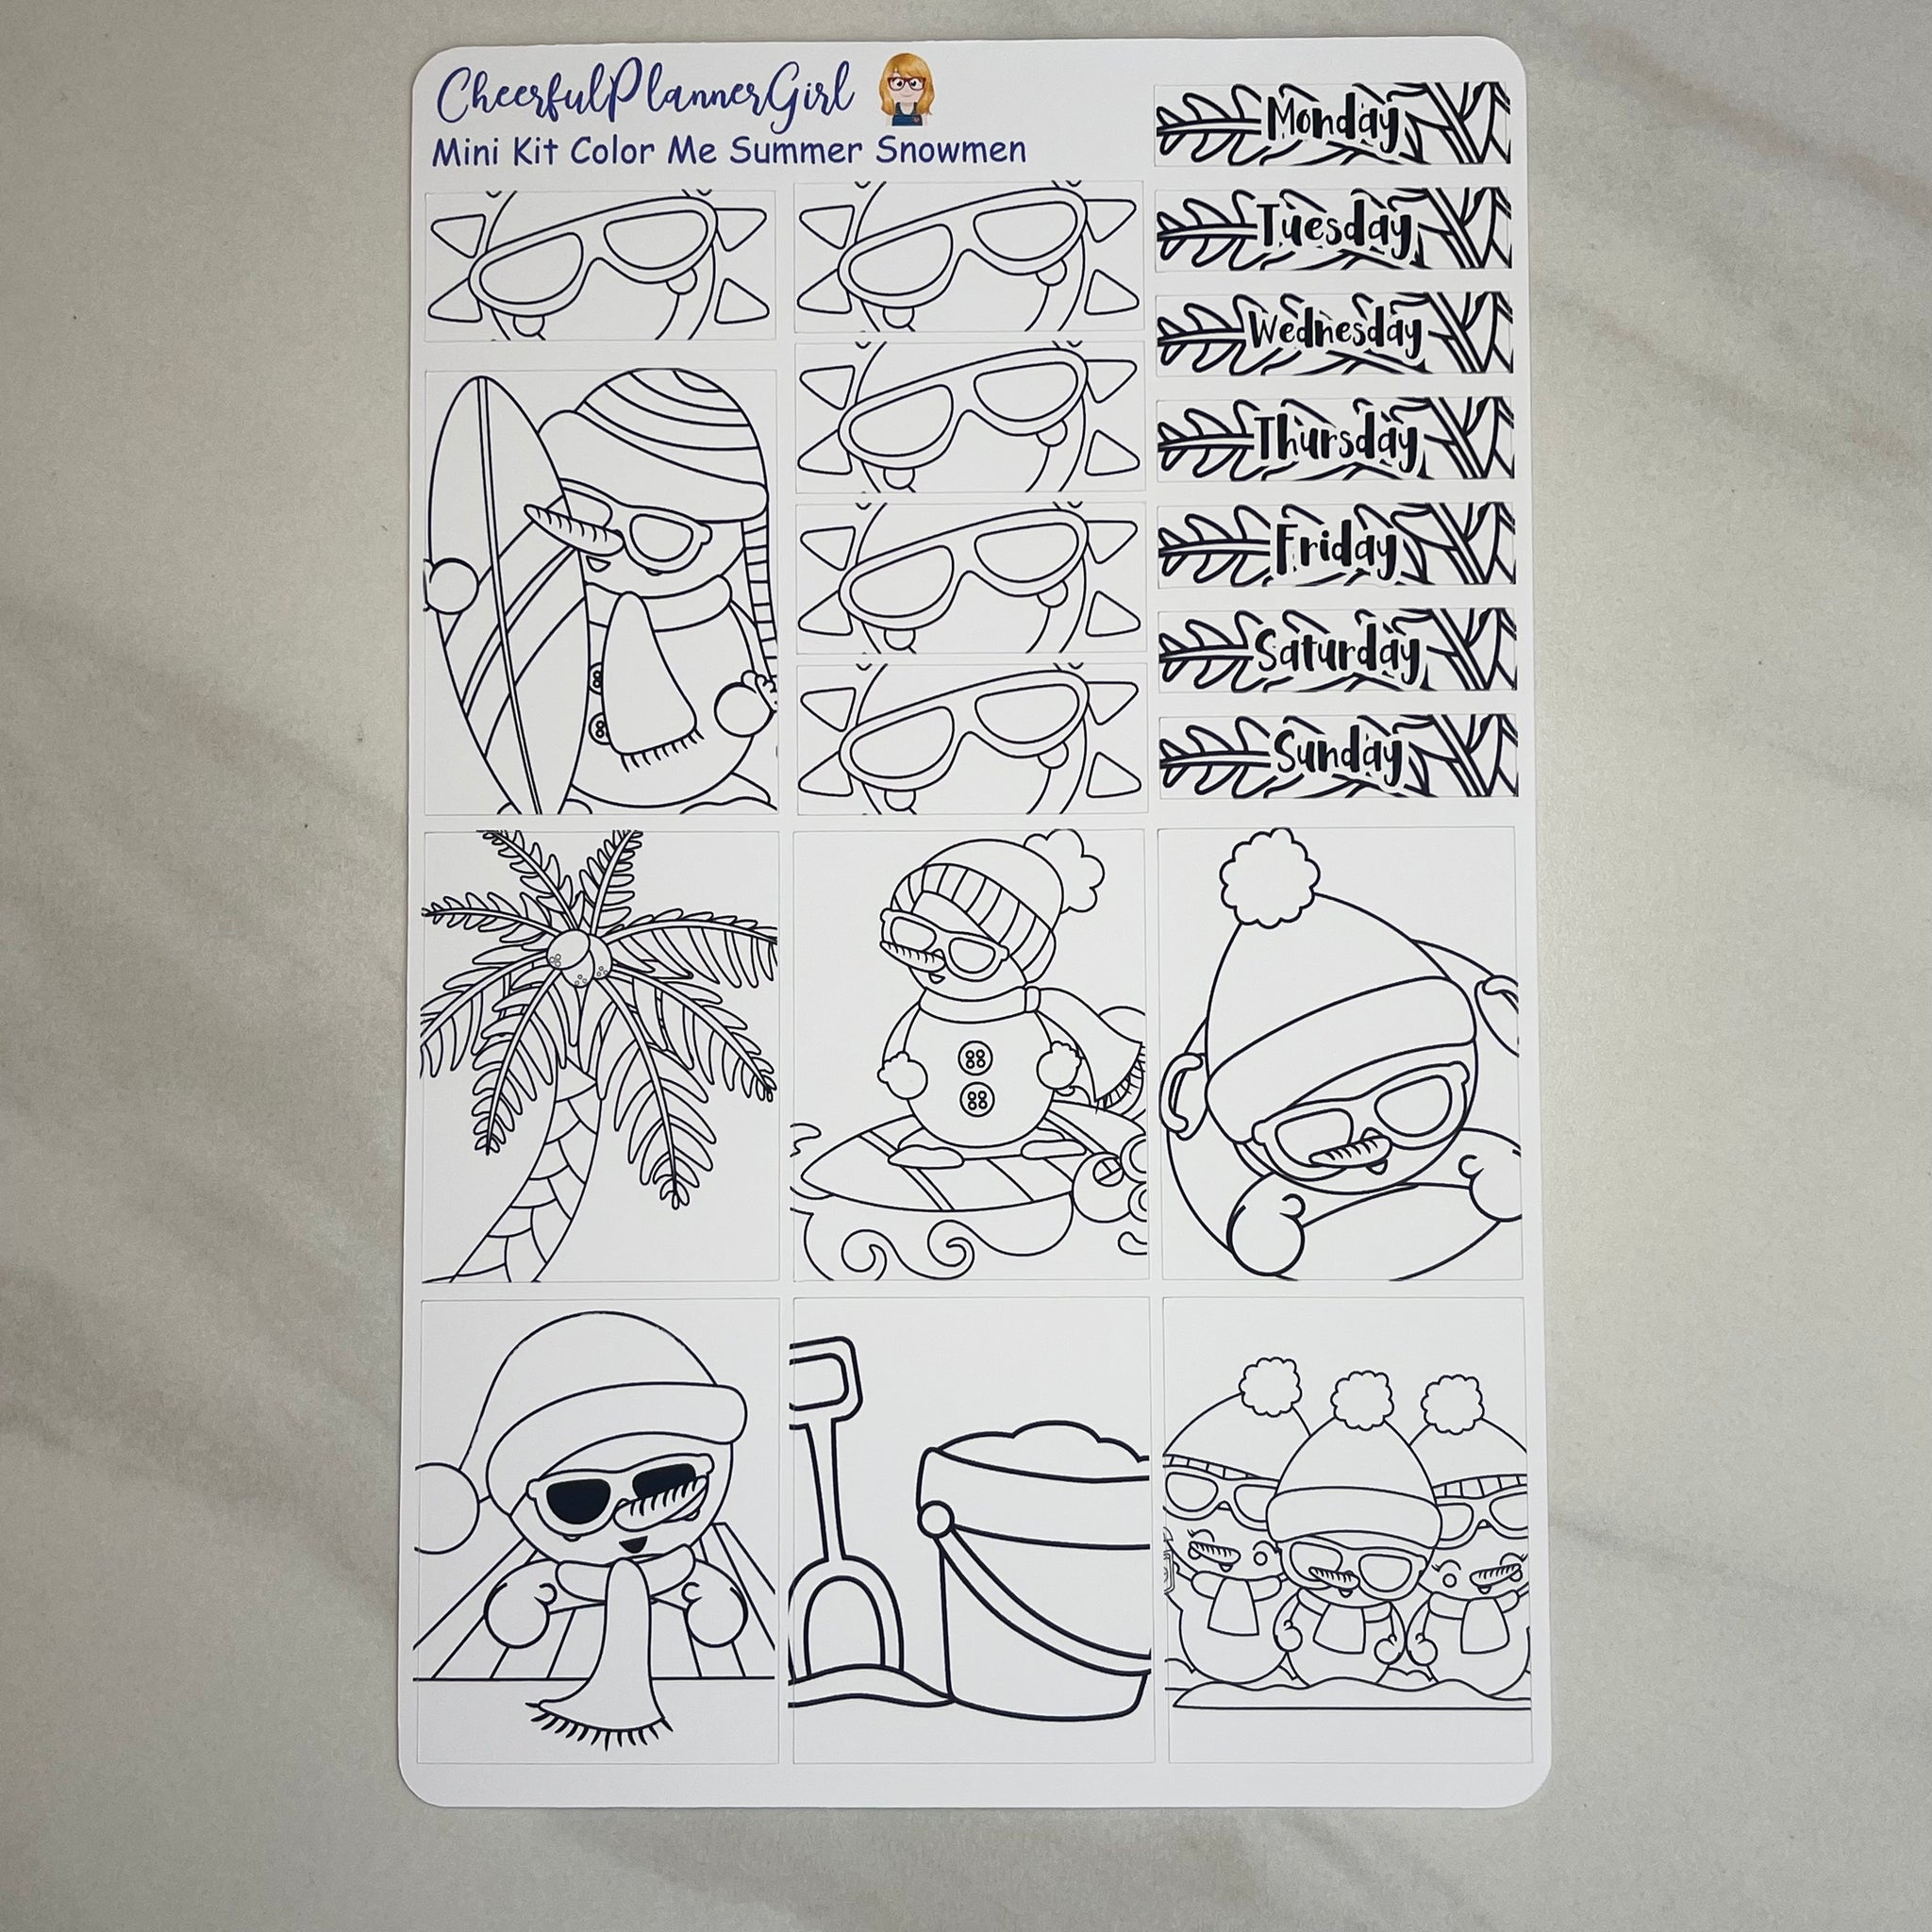 Color Me Vacation Snowmen Mini Kit Weekly Layout Planner Stickers Christmas